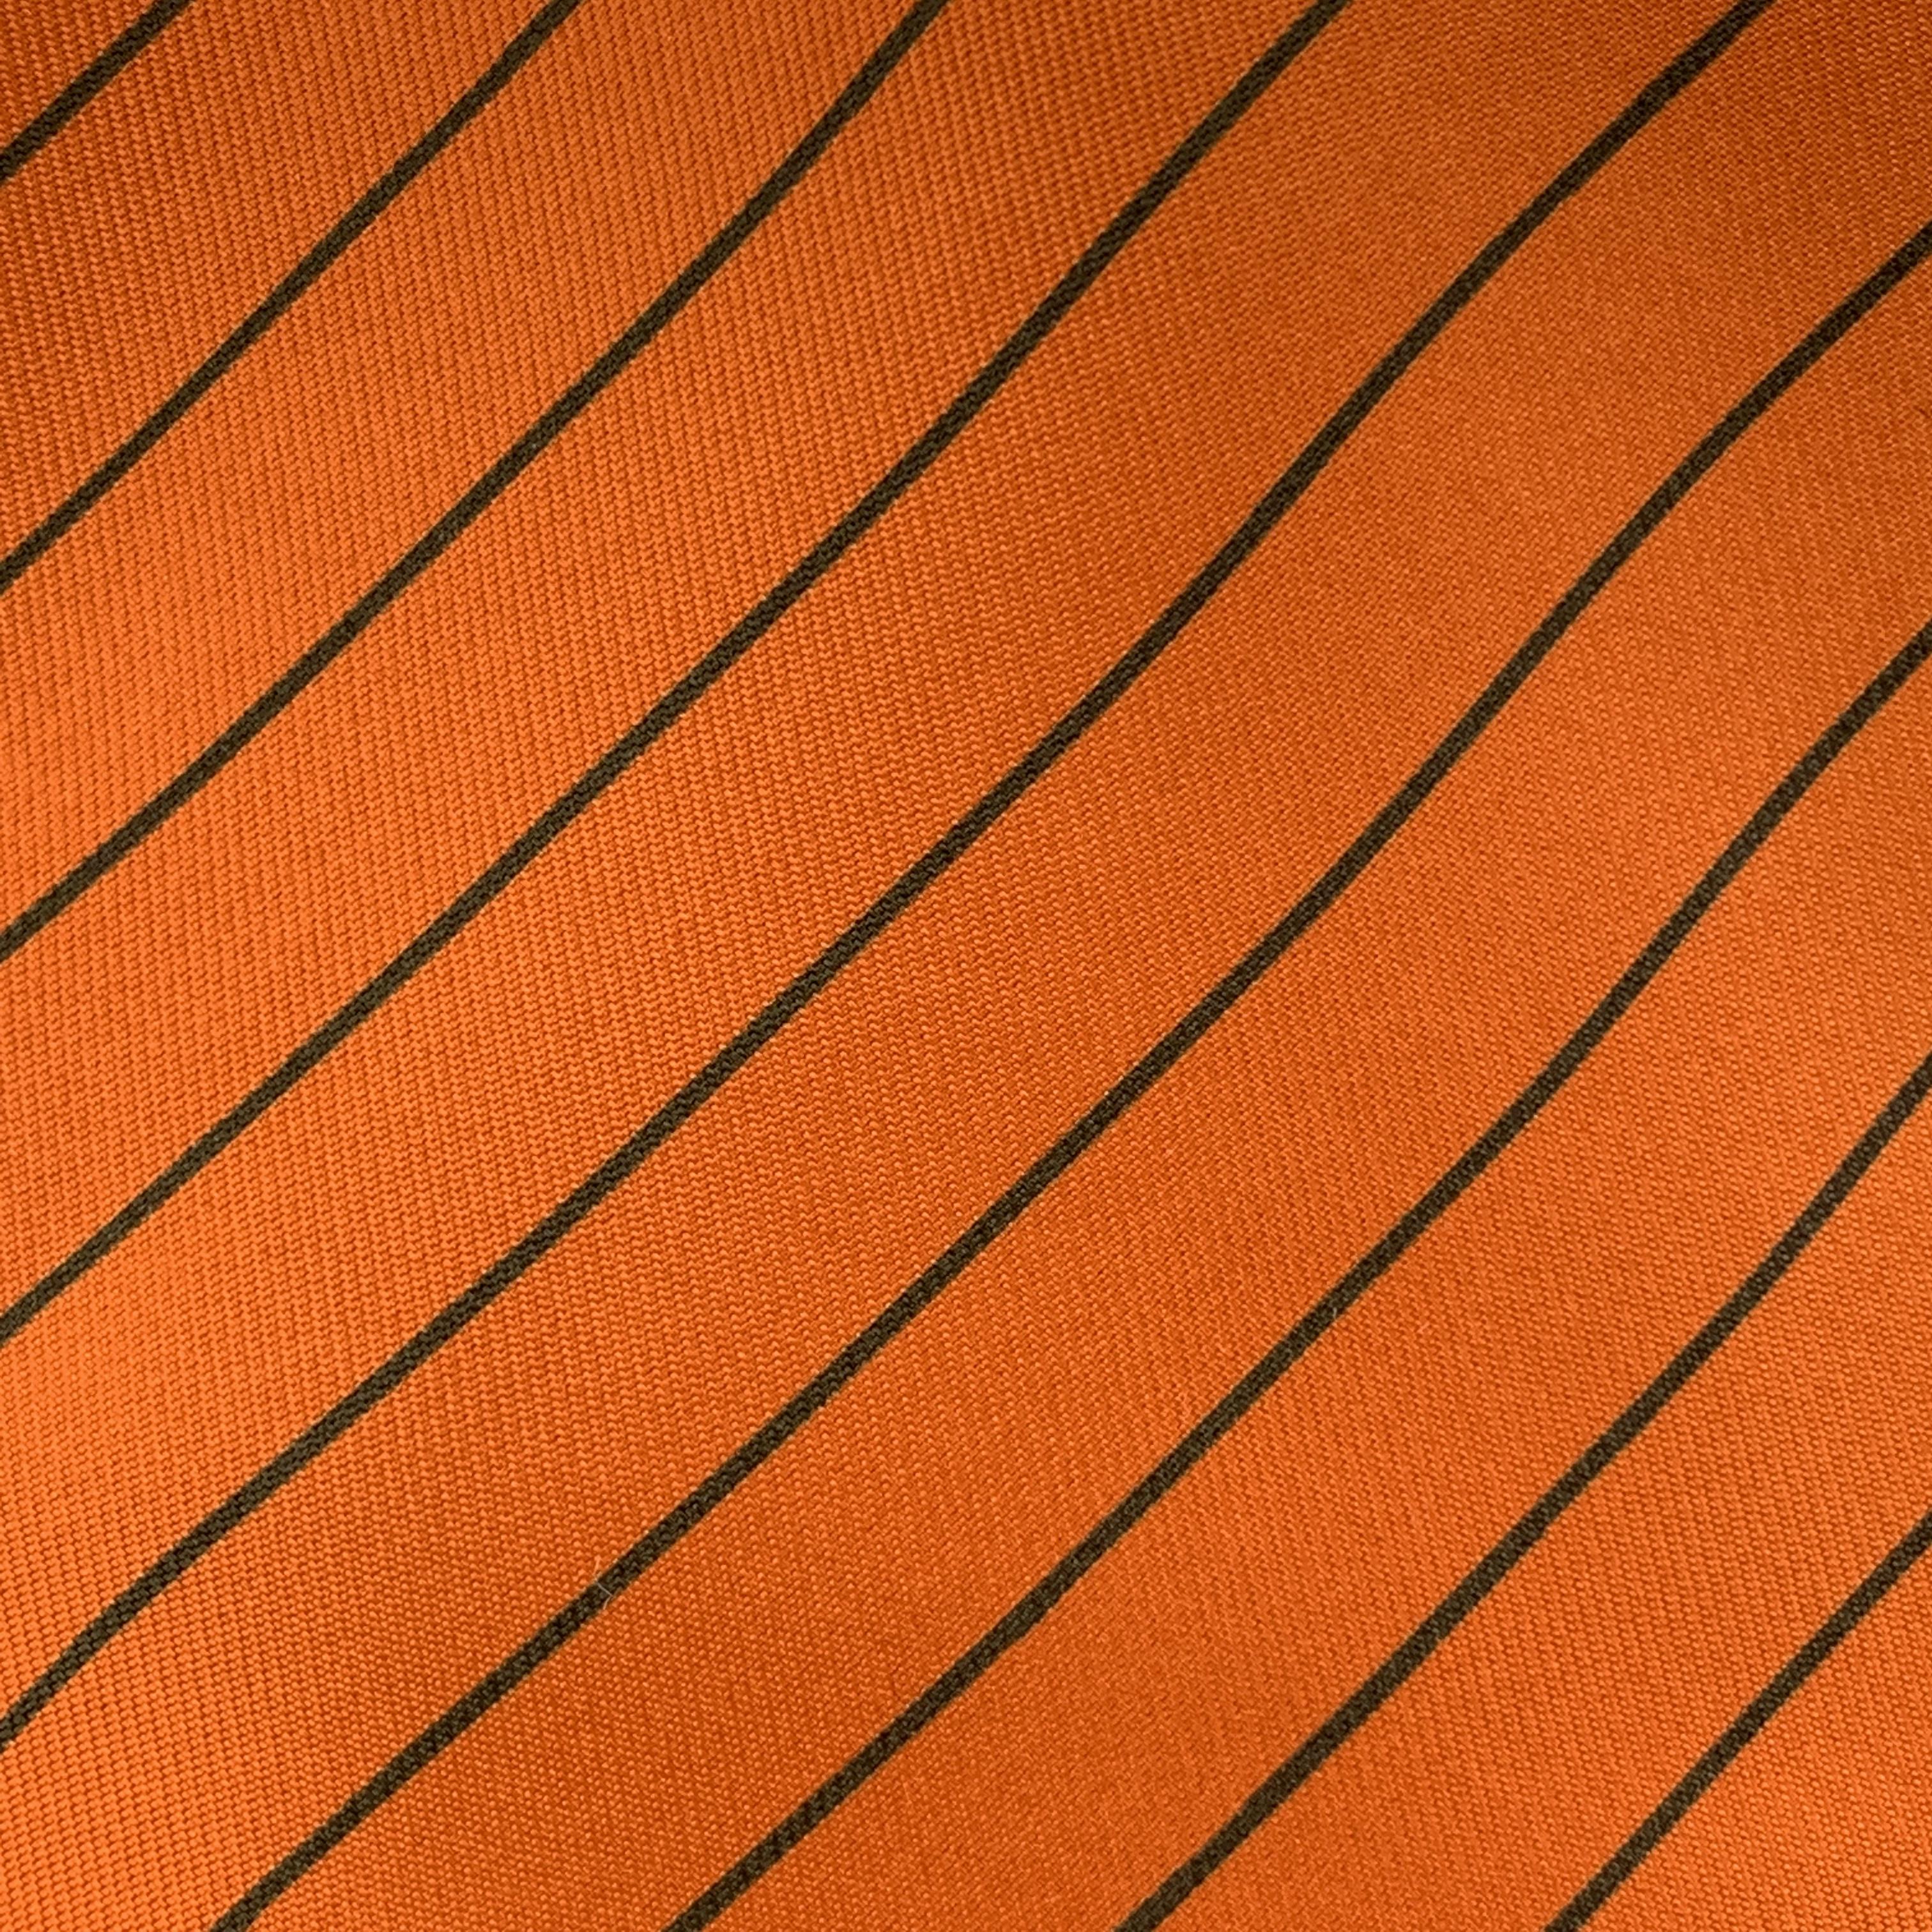 HERMES necktie comes in orange silk twill with all over charcoal diagonal stripe print. Made in France.

Excellent Pre-Owned Condition.

Width: 3.75 in. 